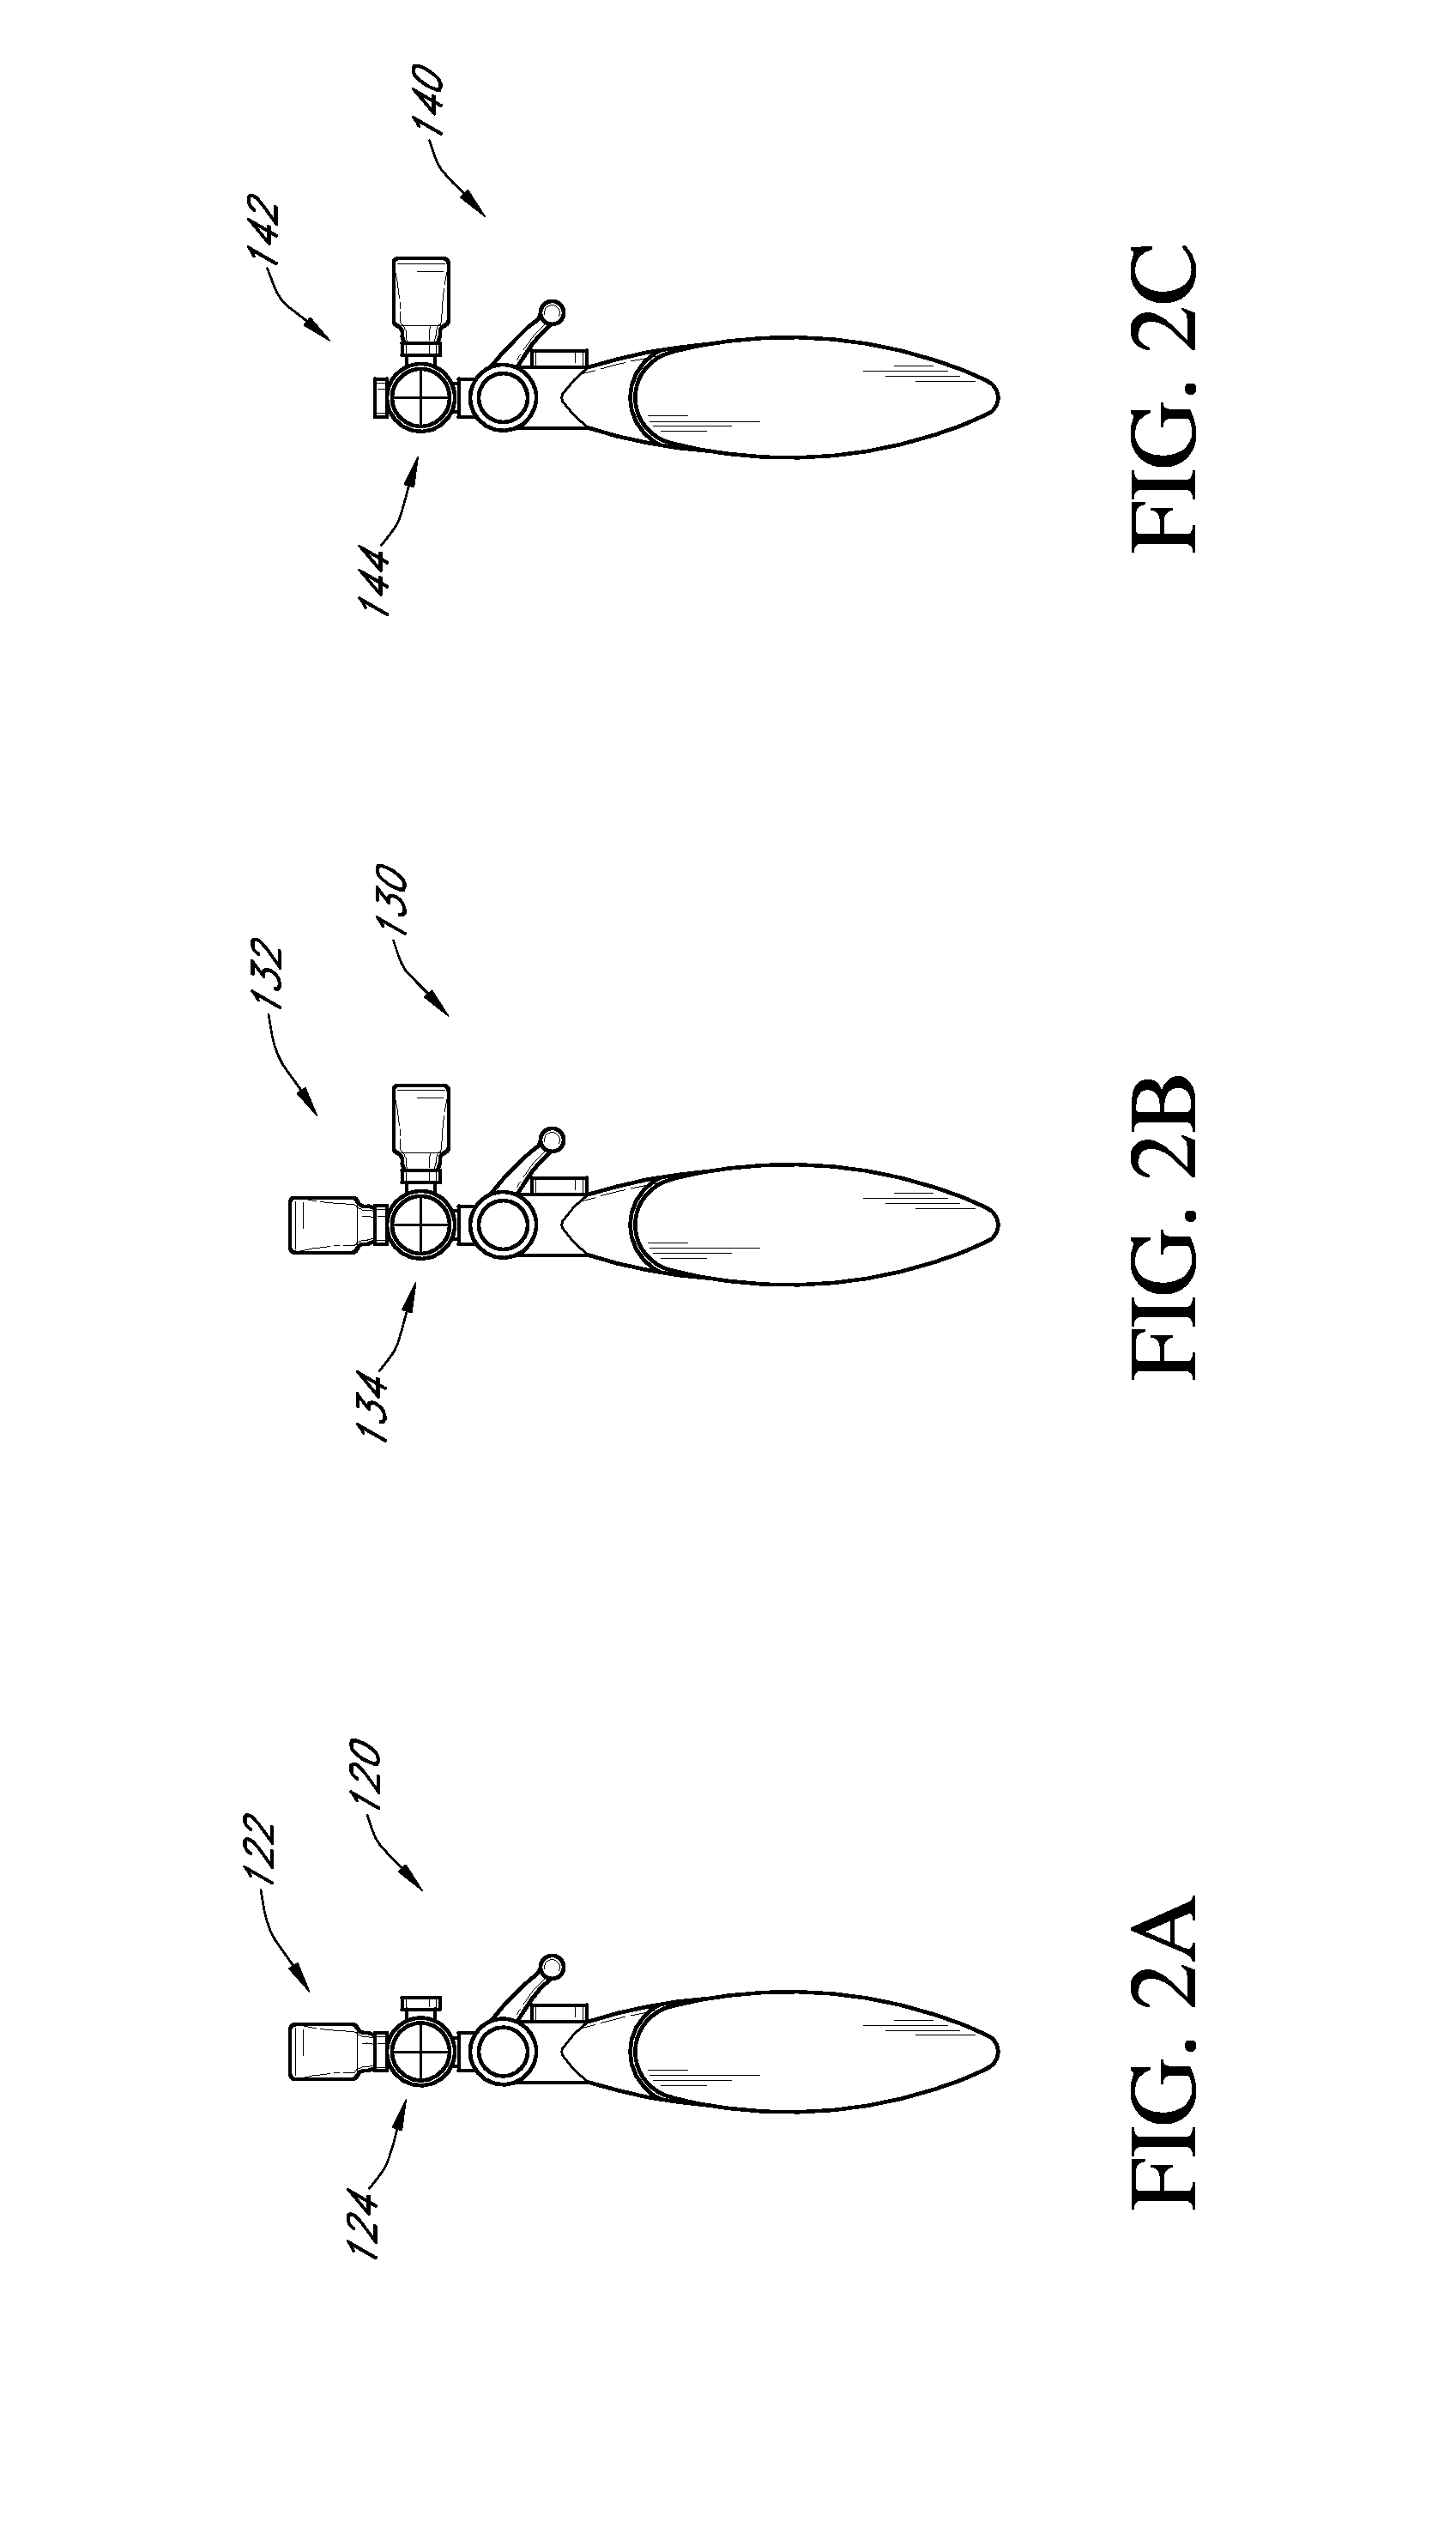 Projectile sighting and launching control system